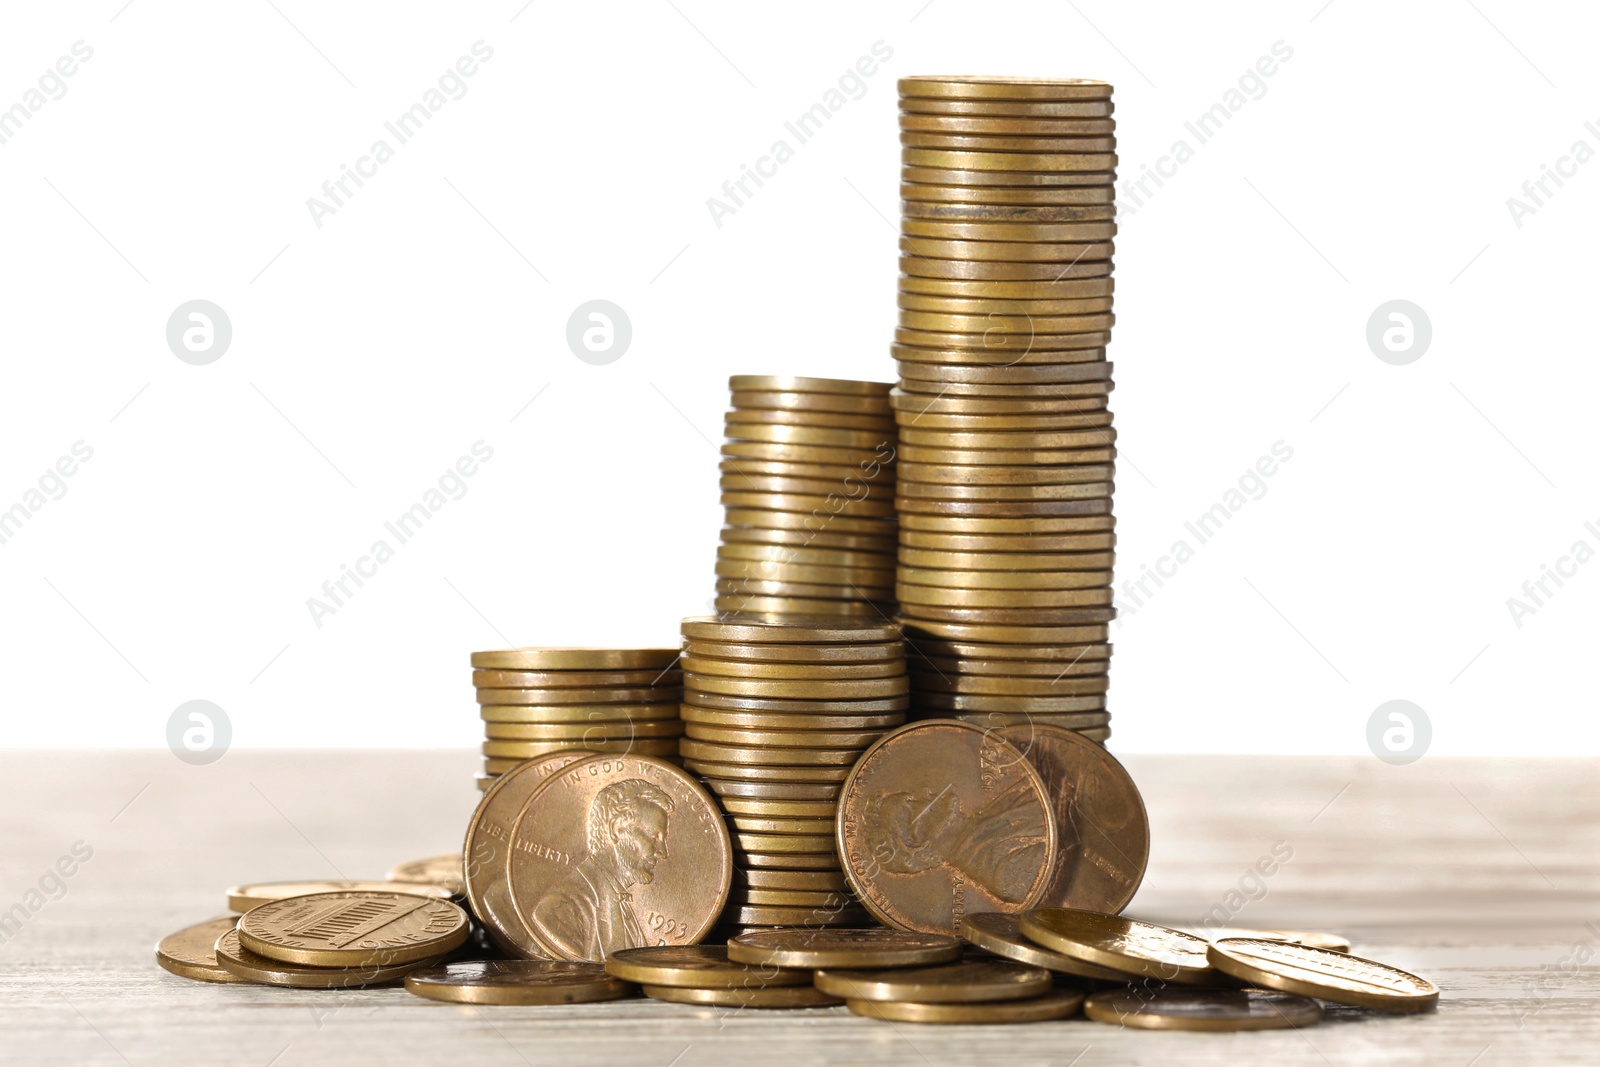 Photo of Stack of coins on wooden table against white background